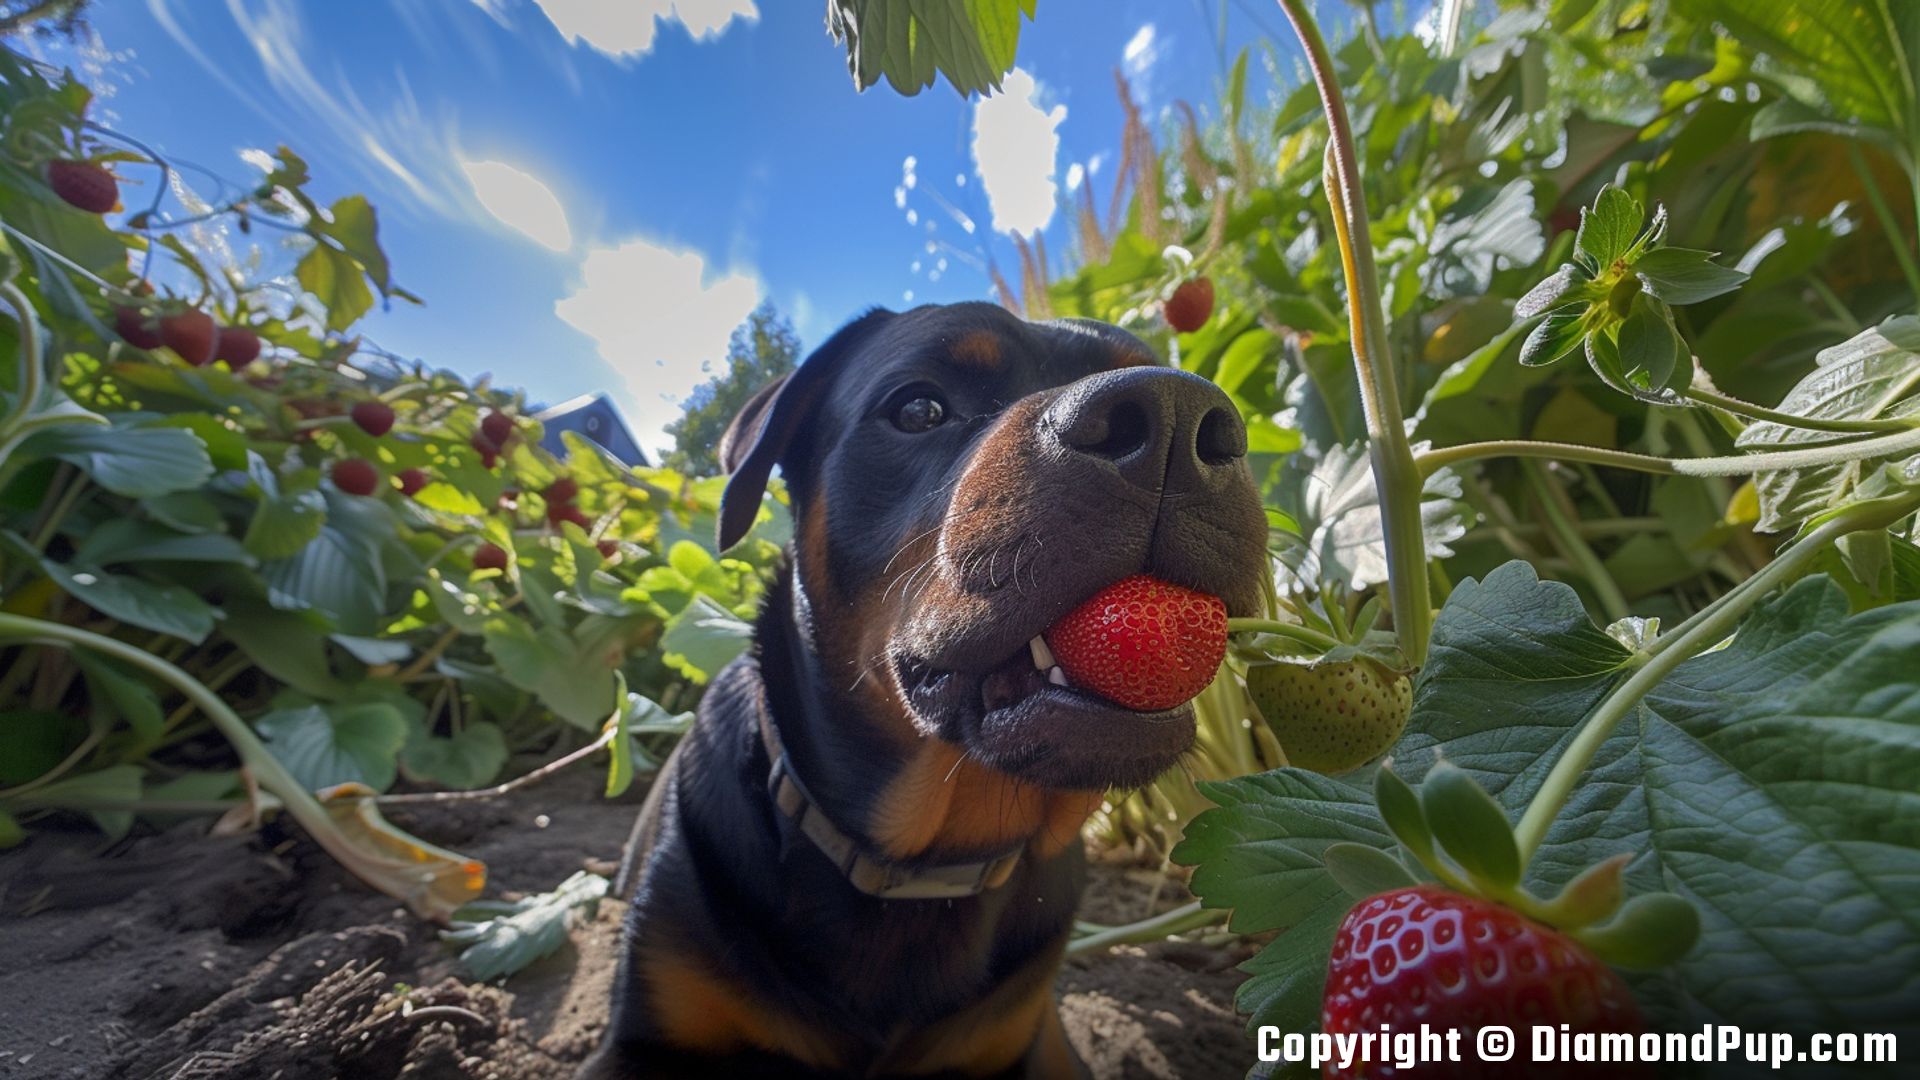 Photograph of a Cute Rottweiler Snacking on Strawberries